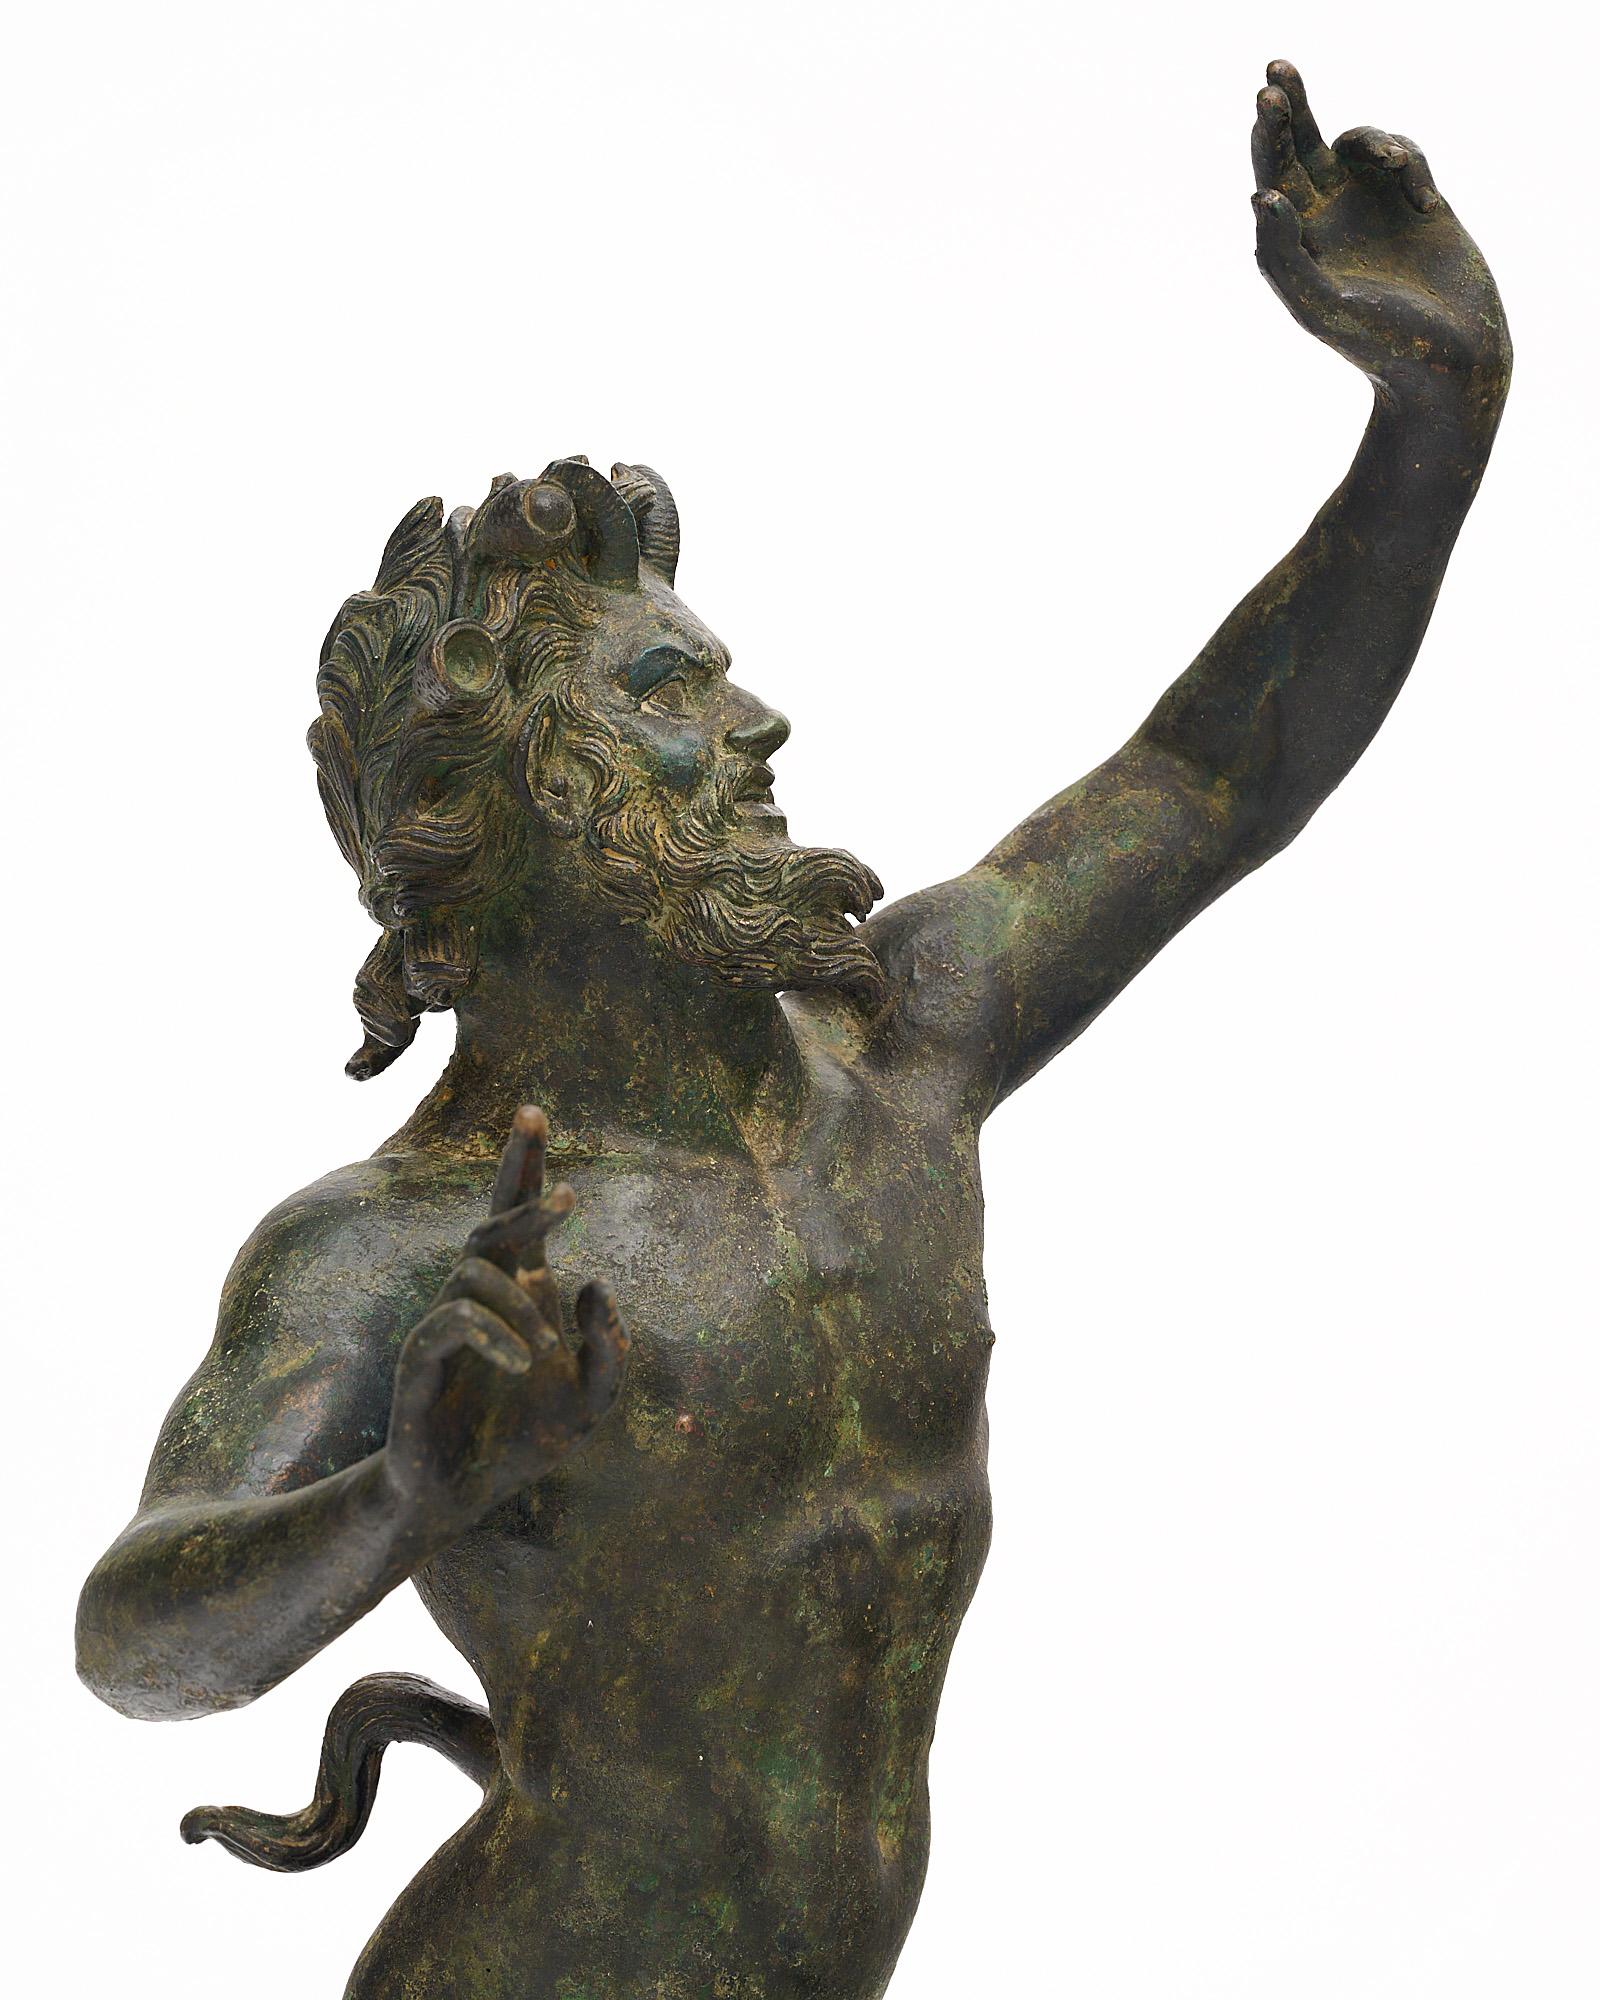 19th Century bronze statue depicting a faun signed “Chiurazzi Napoli” from the Chiurazzi foundry. Raised on a base of 10” by 11.25”, the figure shows a man with horns and tail. This piece has wonderful intricate detail. 
 
Chiurazzi foundries were